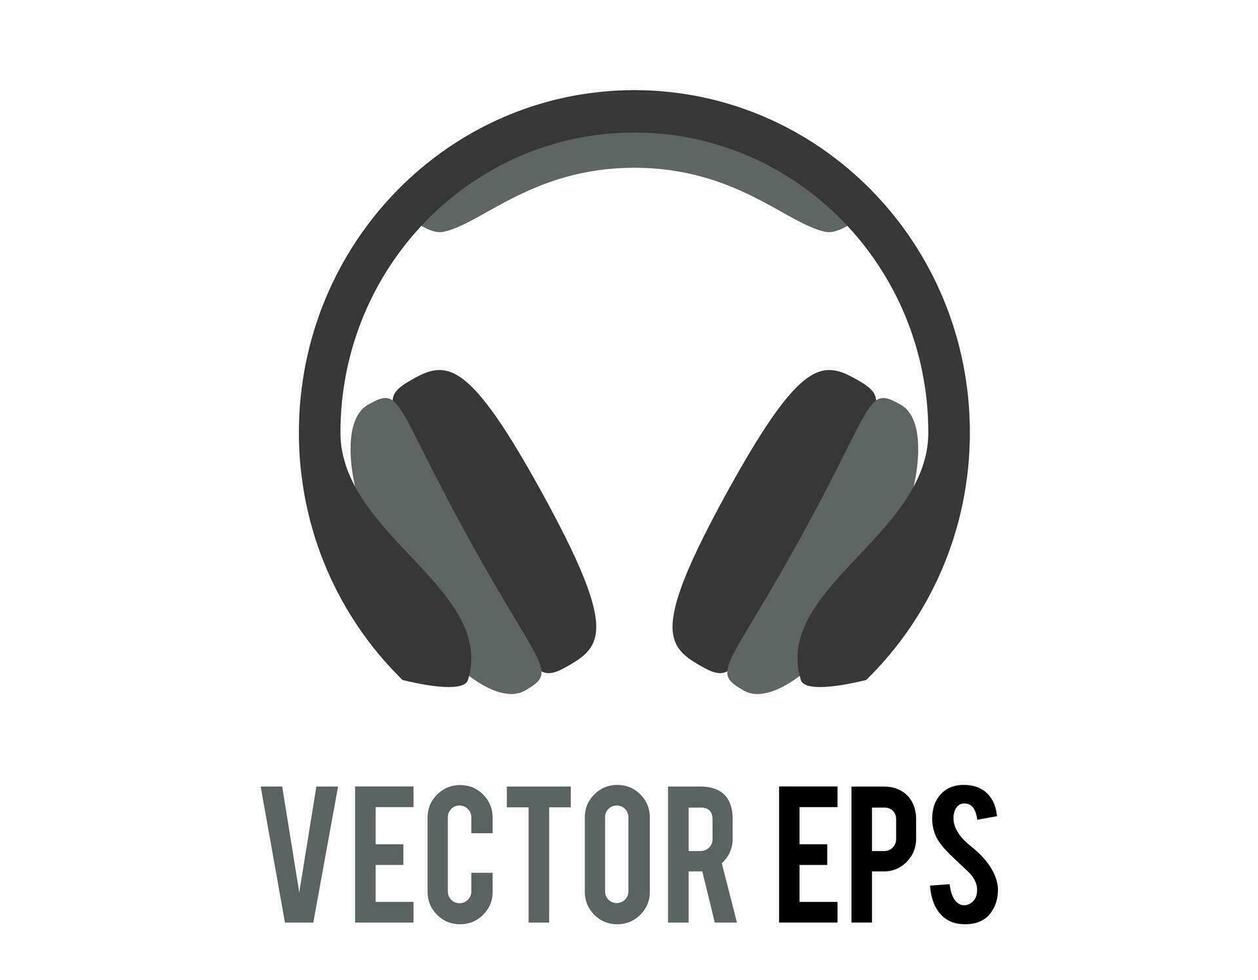 vector black headphones icon, used to listen music or other audio